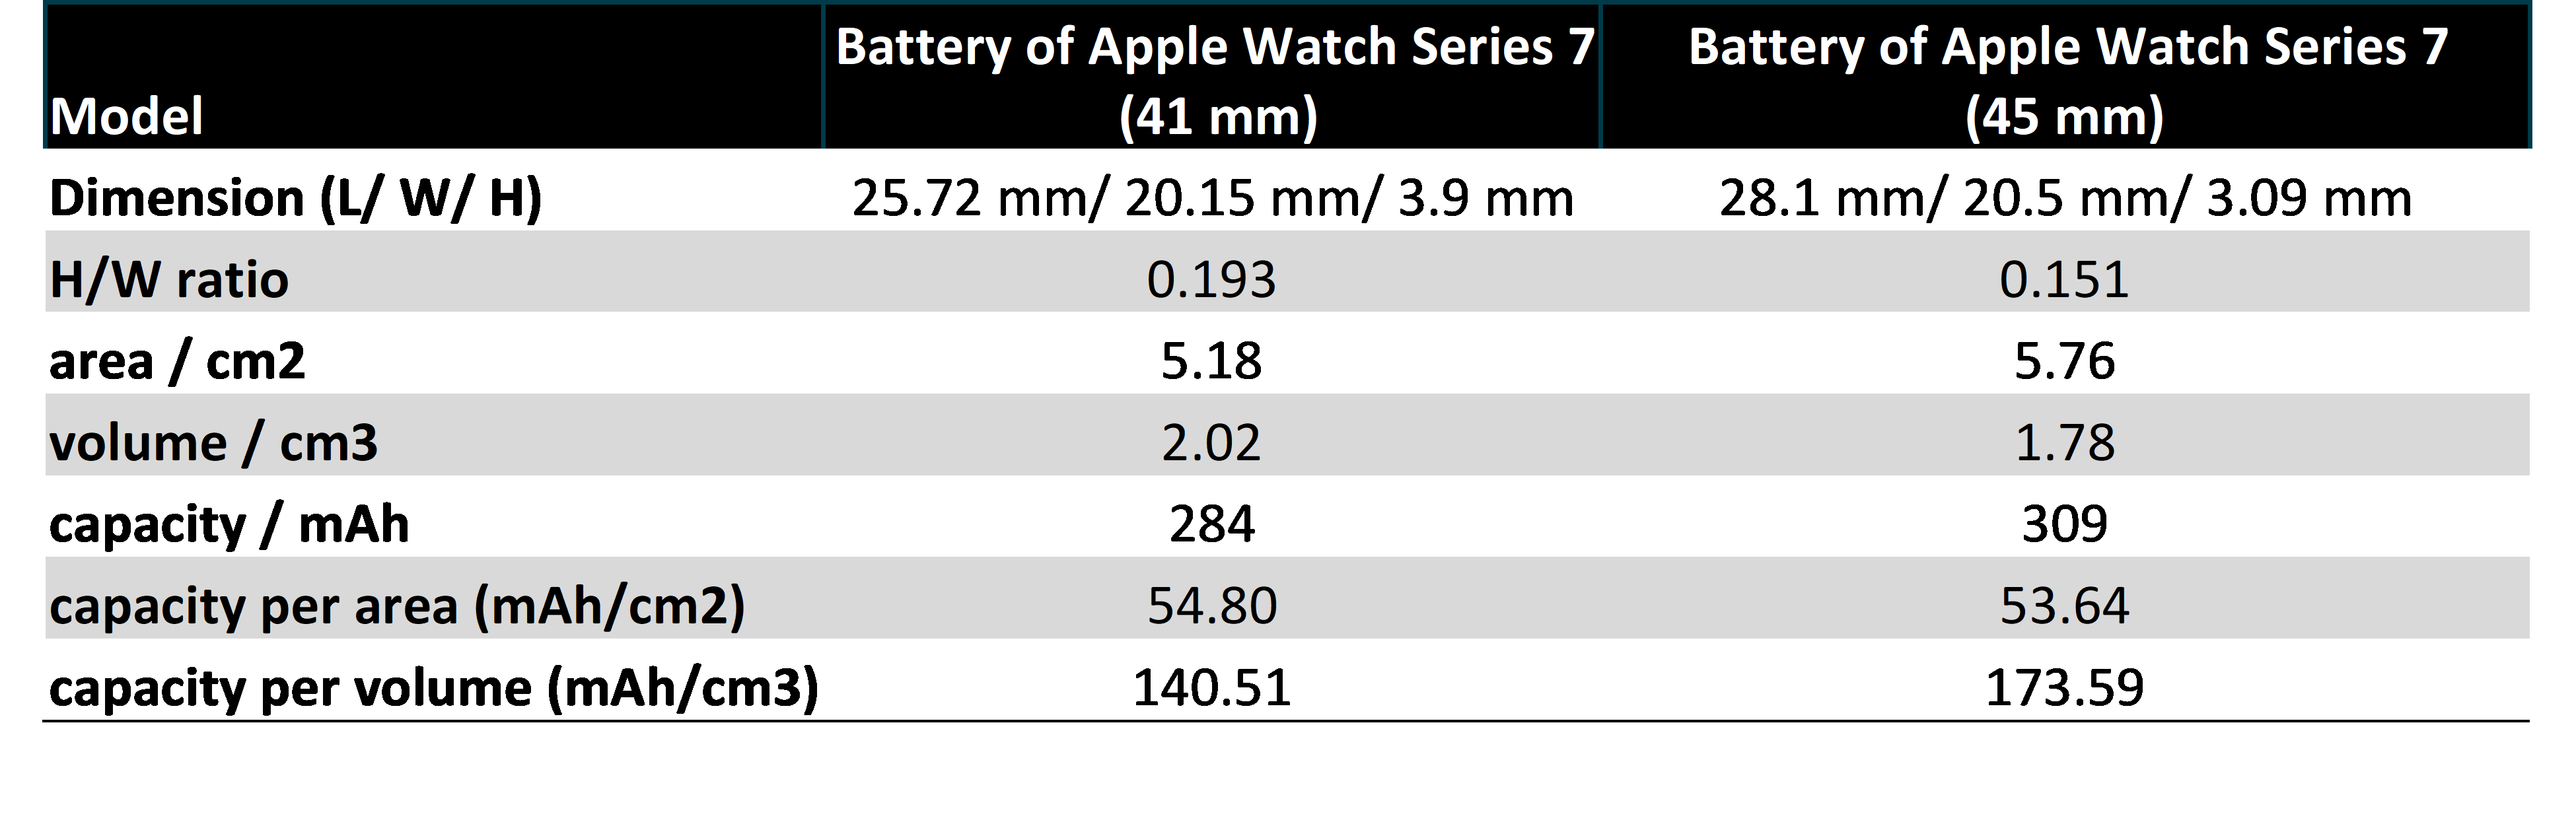 Table 1: A comparison between the batteries of Battery of Apple Watch Series 7
(41 mm) and (45 mm)